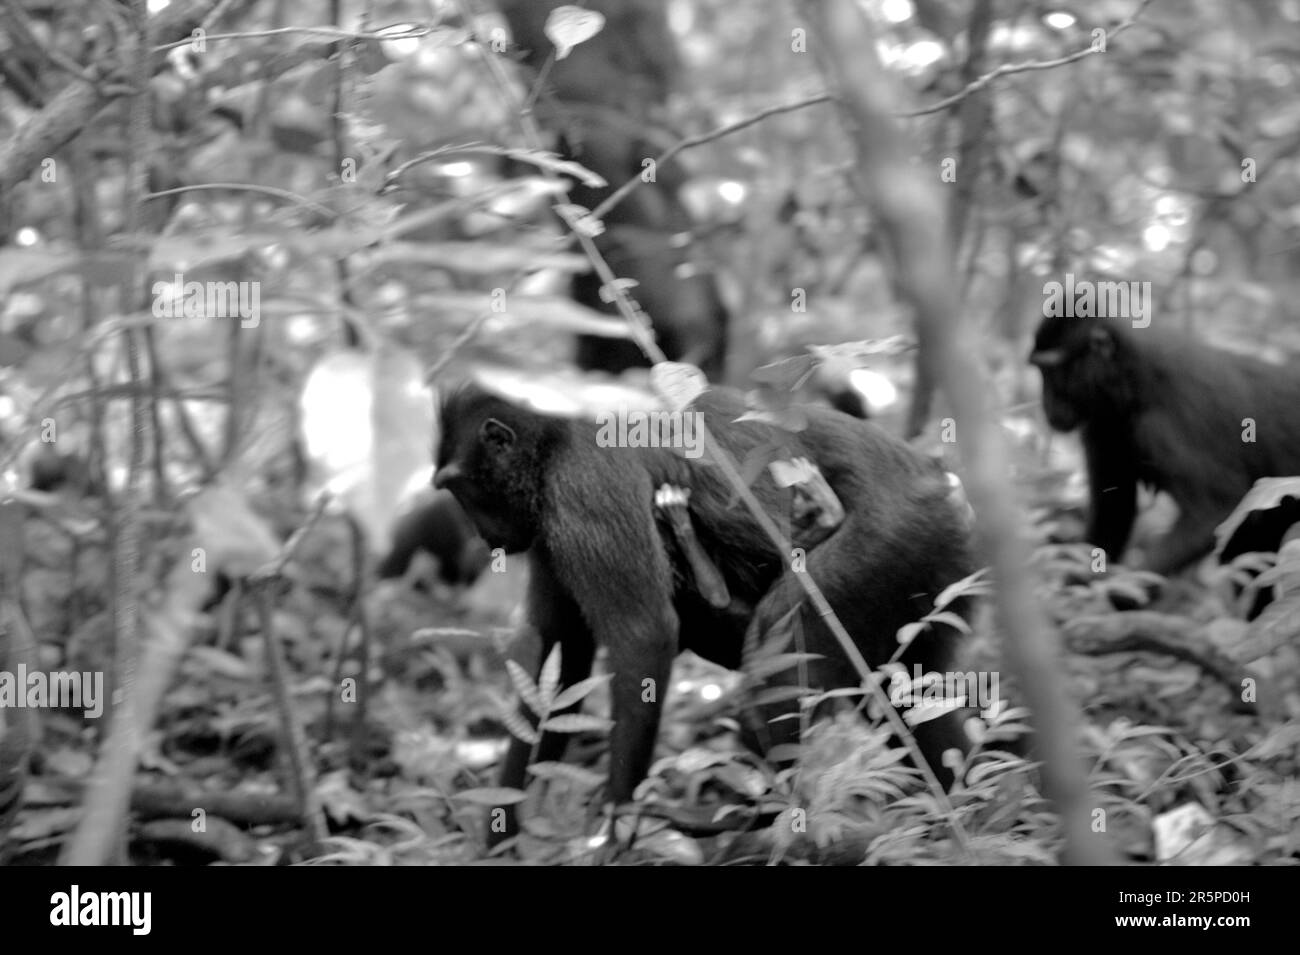 A group of Sulawesi black-crested macaque (Macaca nigra), including a female individual carrying an infant, moves quadrupedally as they are foraging on forest floor in Tangkoko Nature Reserve, North Sulawesi, Indonesia. Climate change and disease are emerging threats to primates, and approximately one-quarter of primates’ ranges have temperatures over historical ones, according to a team of scientists led by Miriam Plaza Pinto (Departamento de Ecologia, Centro de Biociências, Universidade Federal do Rio Grande do Norte, Natal) in their scientific report published on Nature in January 2023. Stock Photo